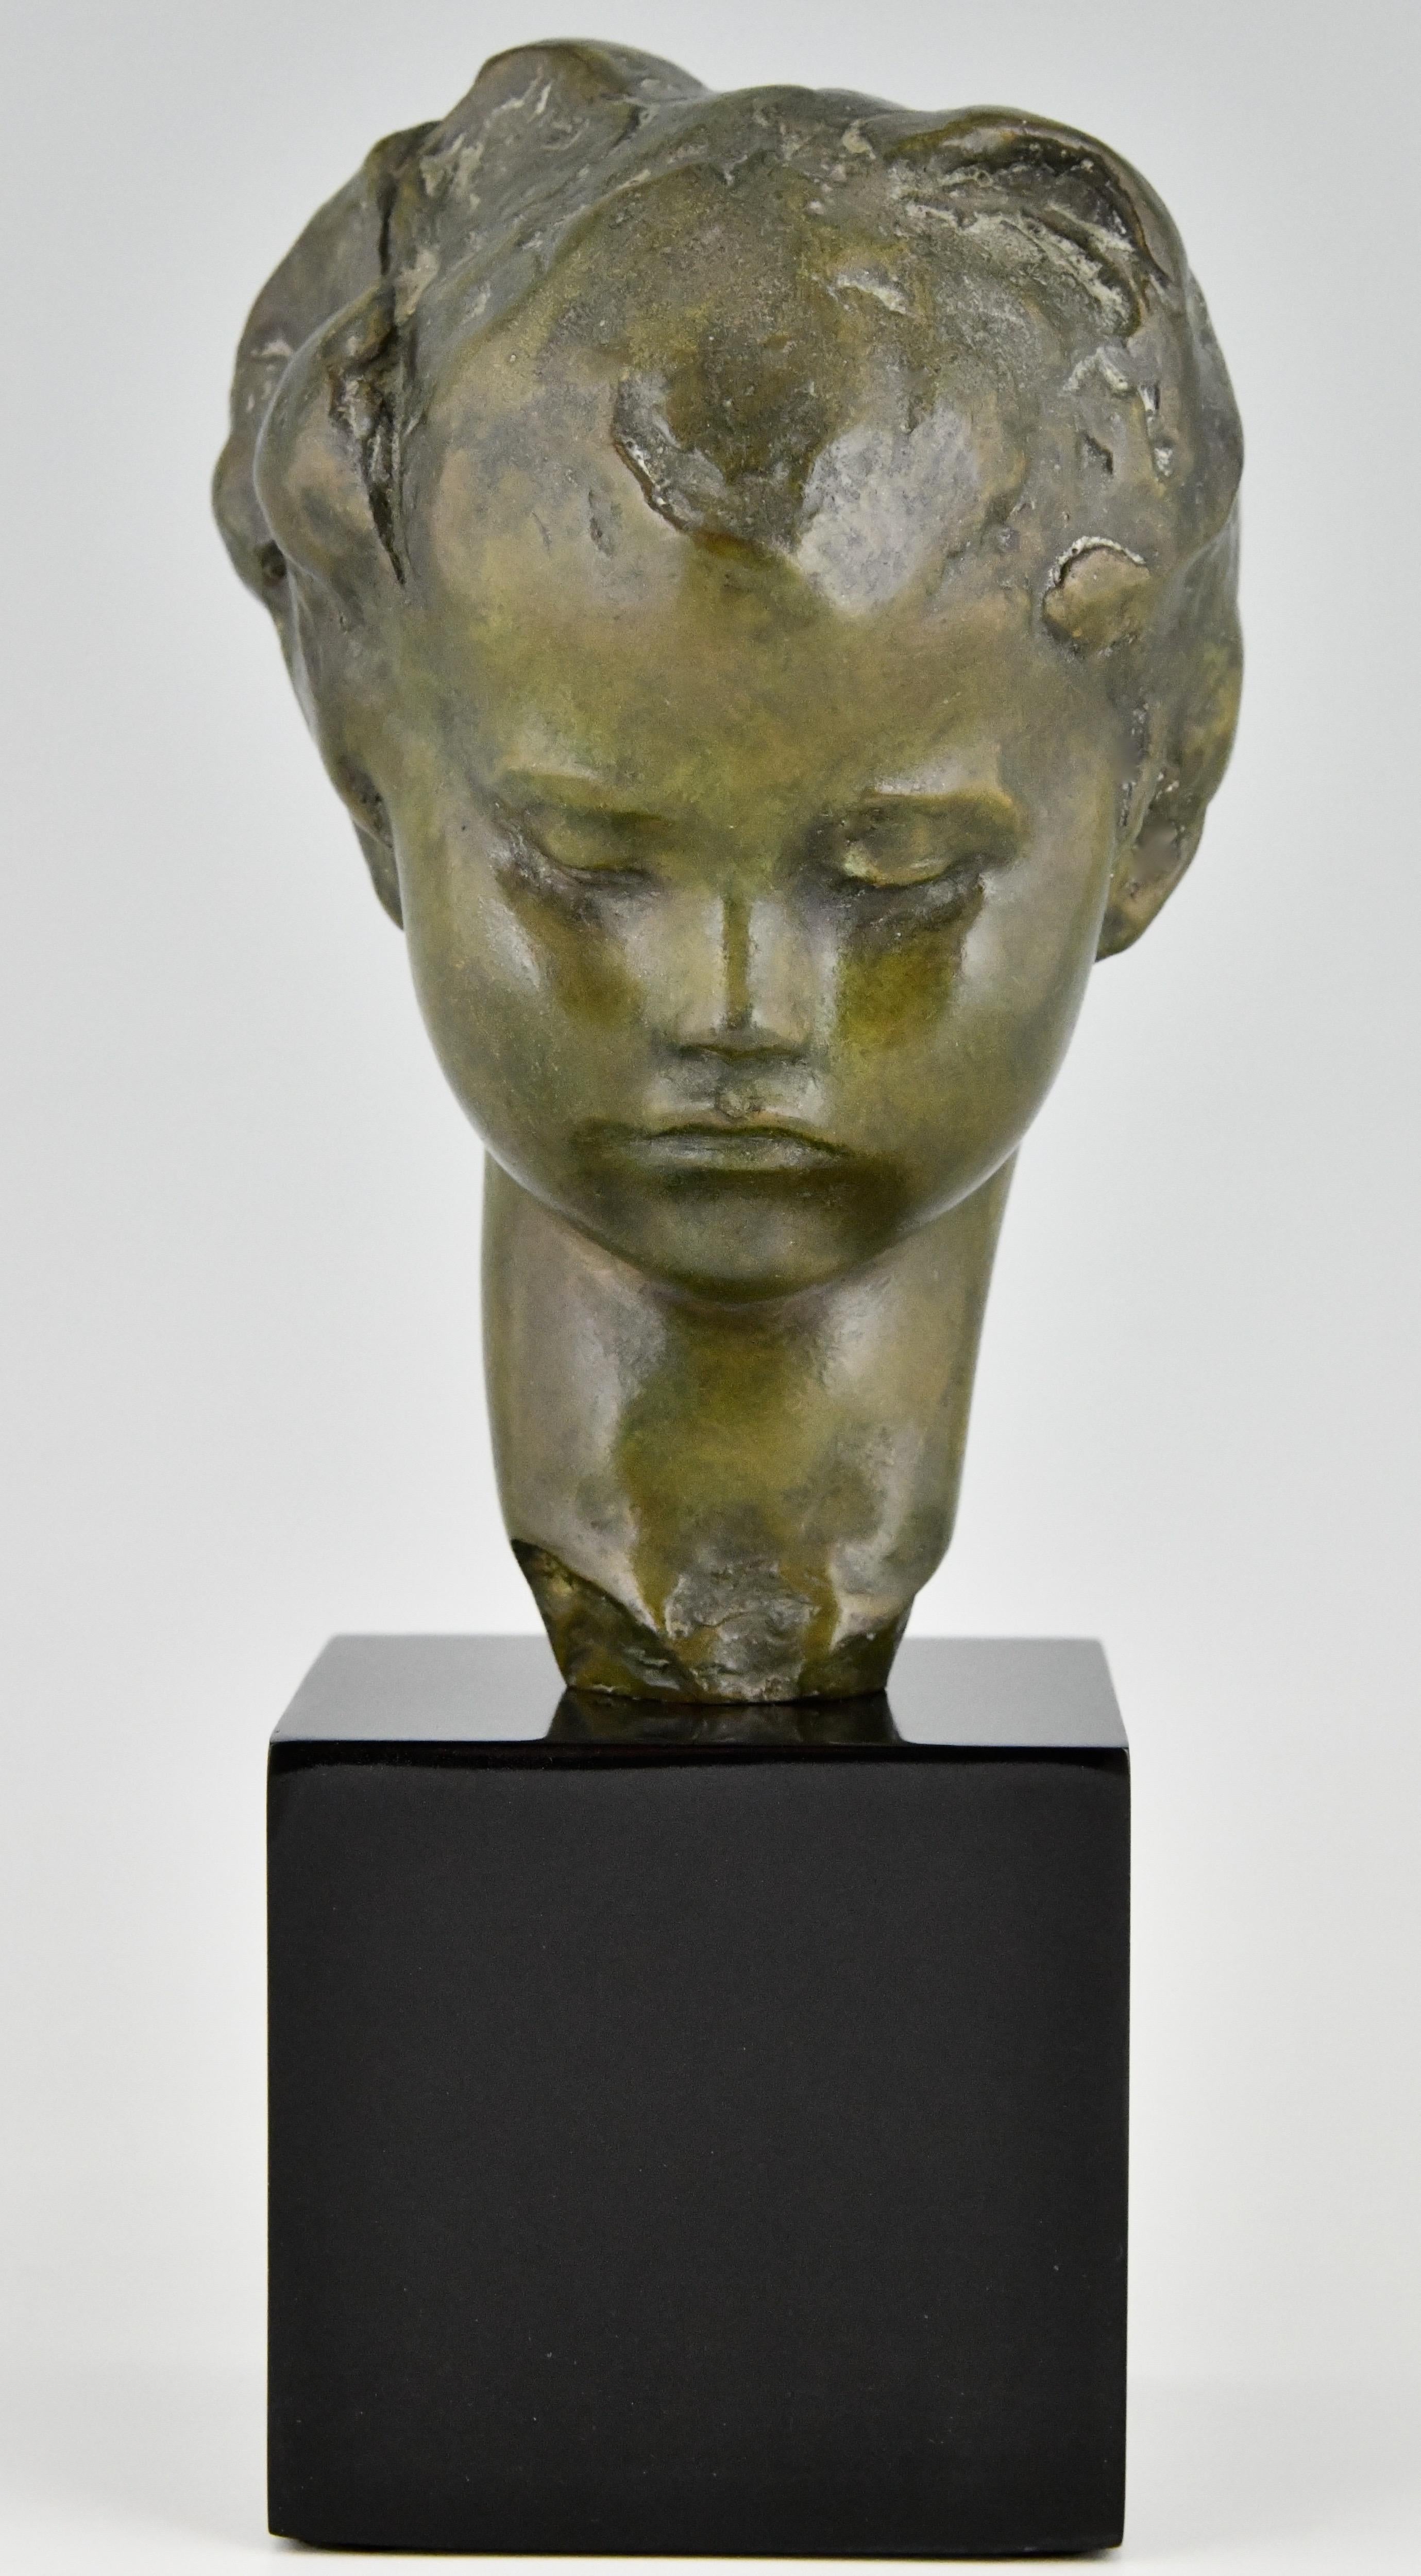 Art Deco bronze sculpture bust of a girl by the artist Amadeo Gennarelli,
who was born in Napels and worked in France
The bust is cast in the lost wax technique, cire perdue, Ca. 1920. 
The patinated bronze head stands on a Belgian Black marble